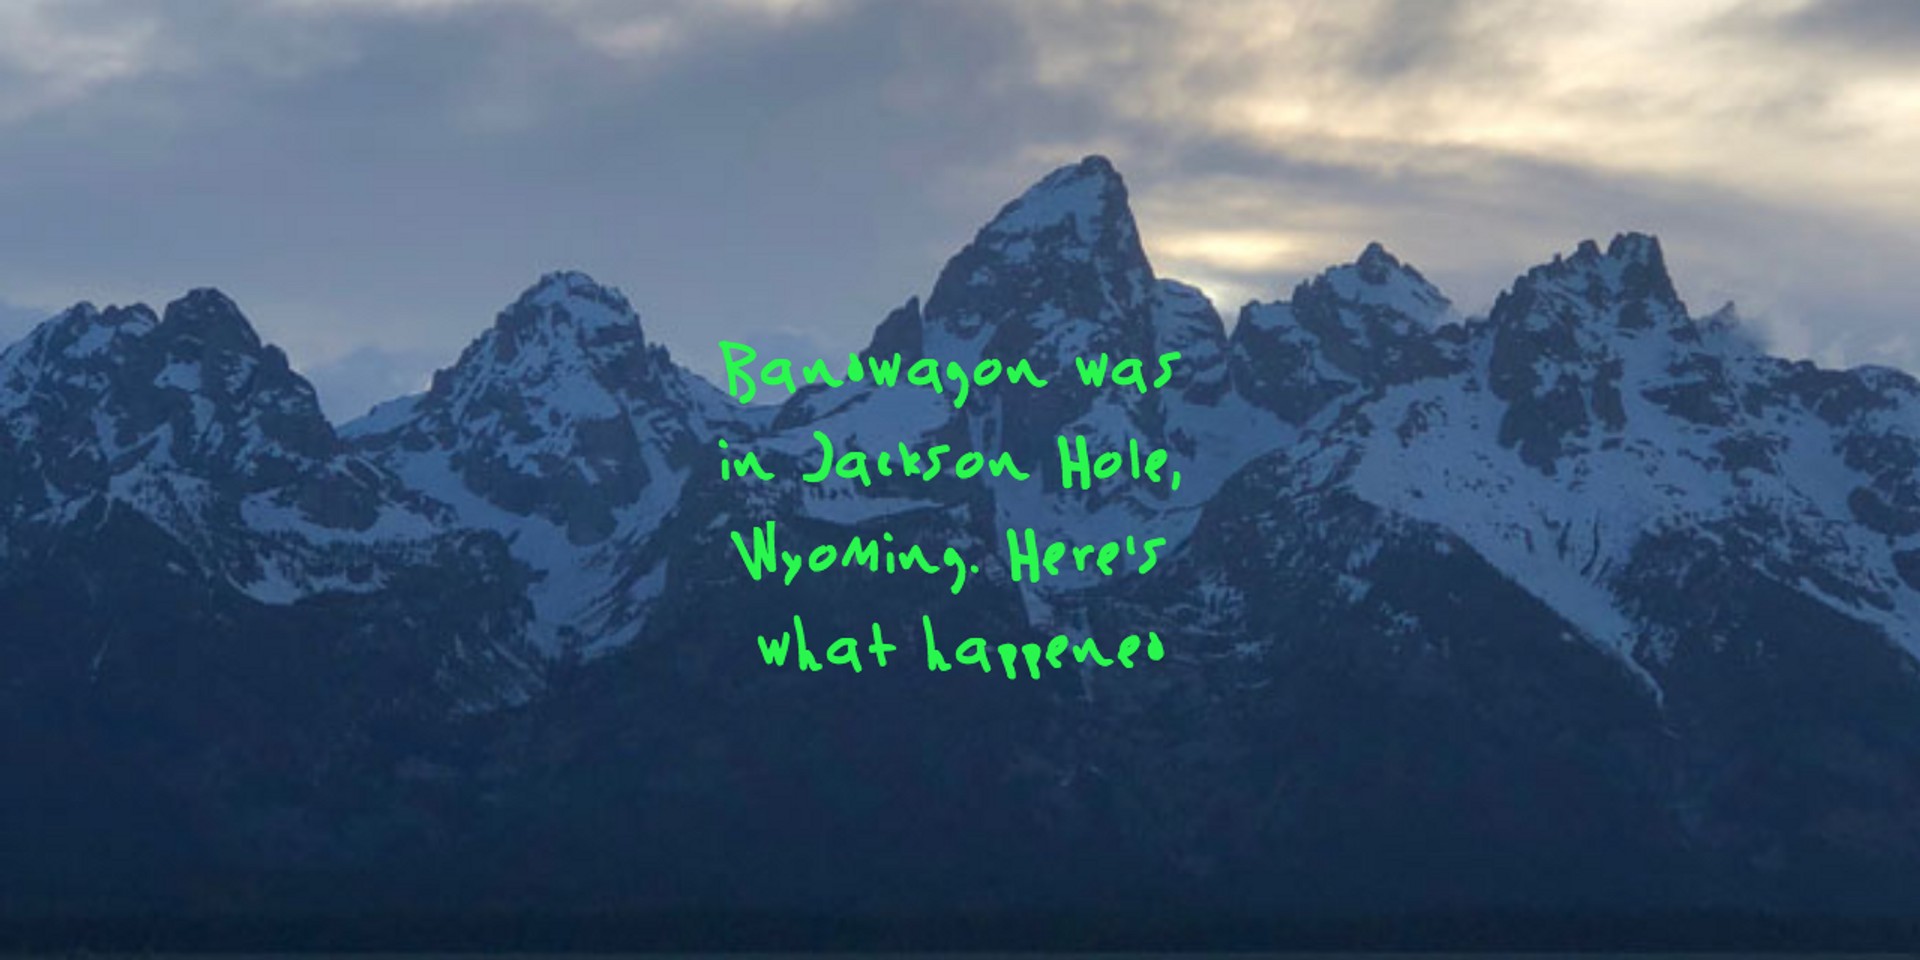 A firsthand account of Kanye West's release of ye in Jackson Hole, Wyoming